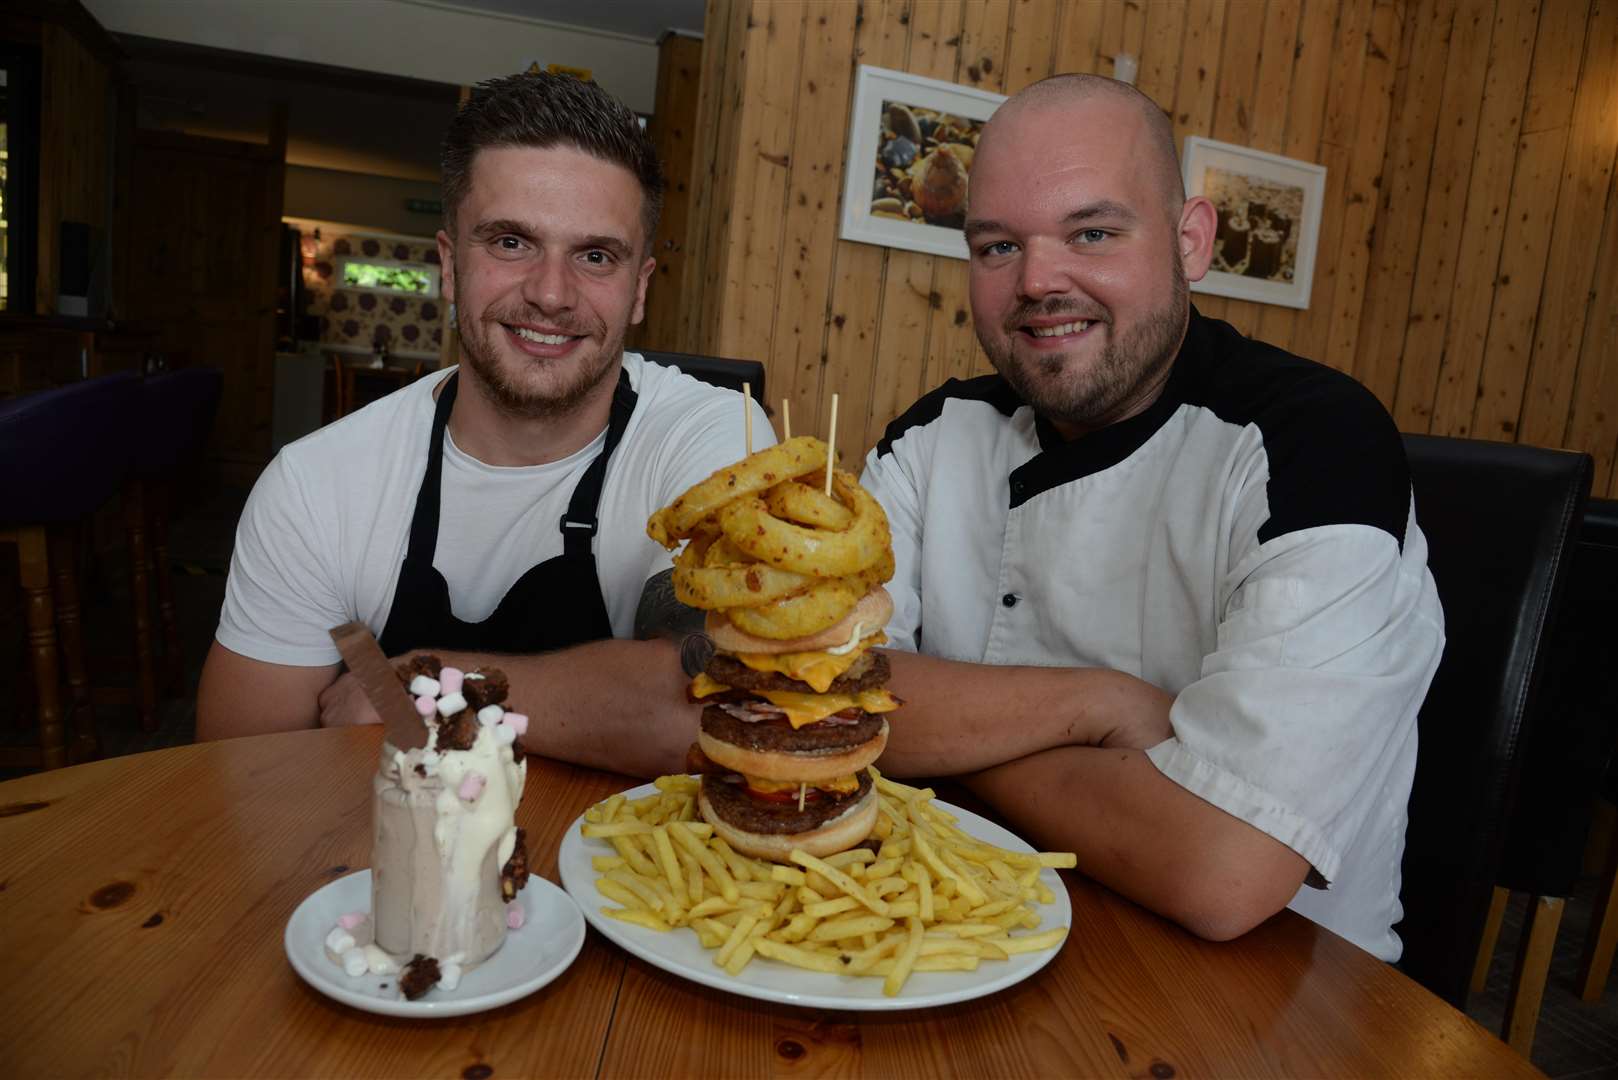 Roger Heathcote and David Waddington with their creation at the Rising Sun, Beltinge. Picture: Chris Davey